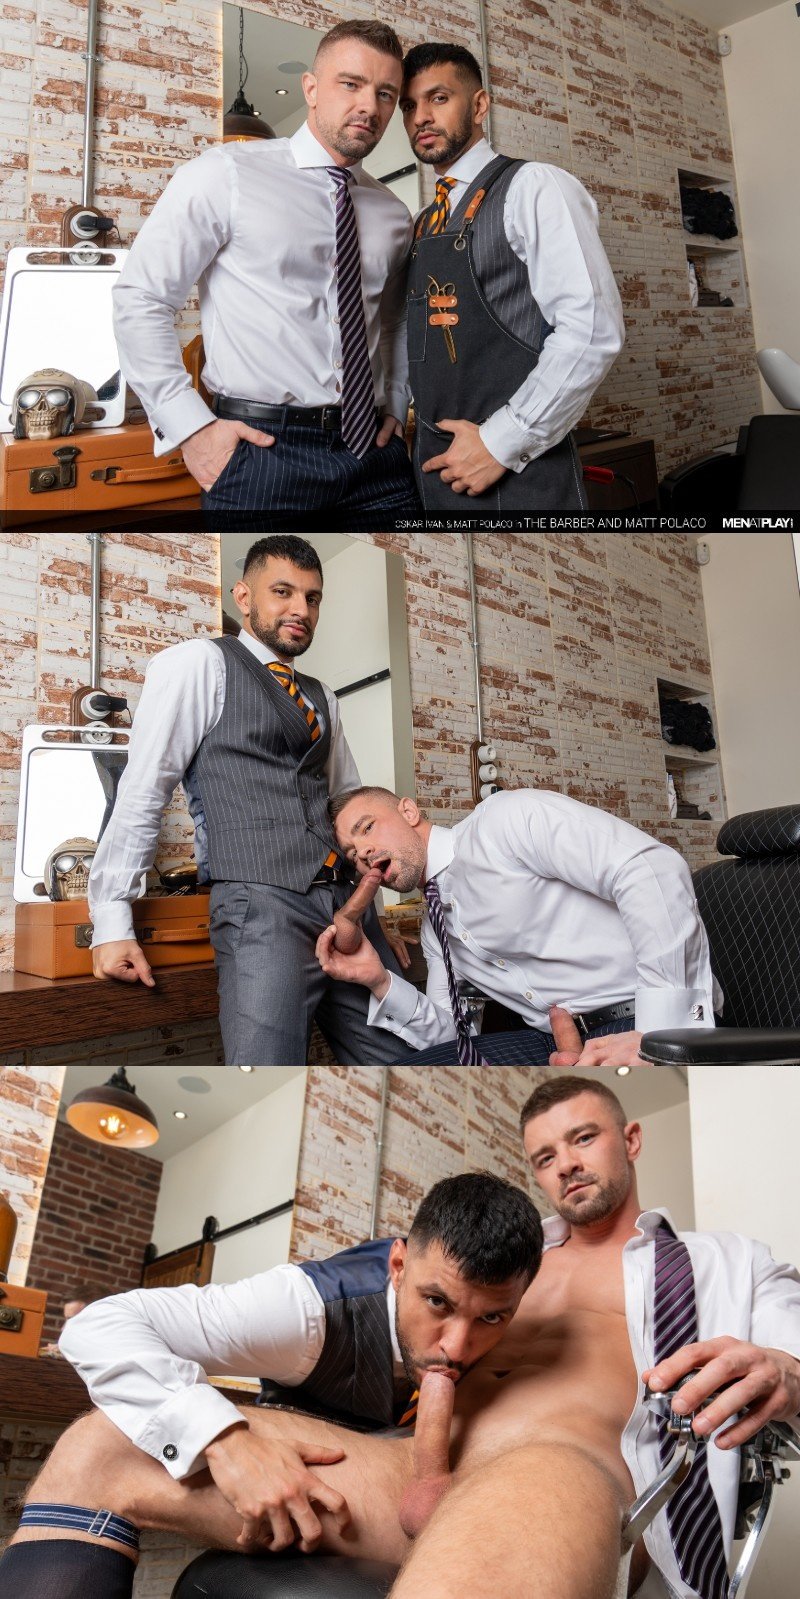 Polish Businessman Gets Fucked by His Barber in Shop